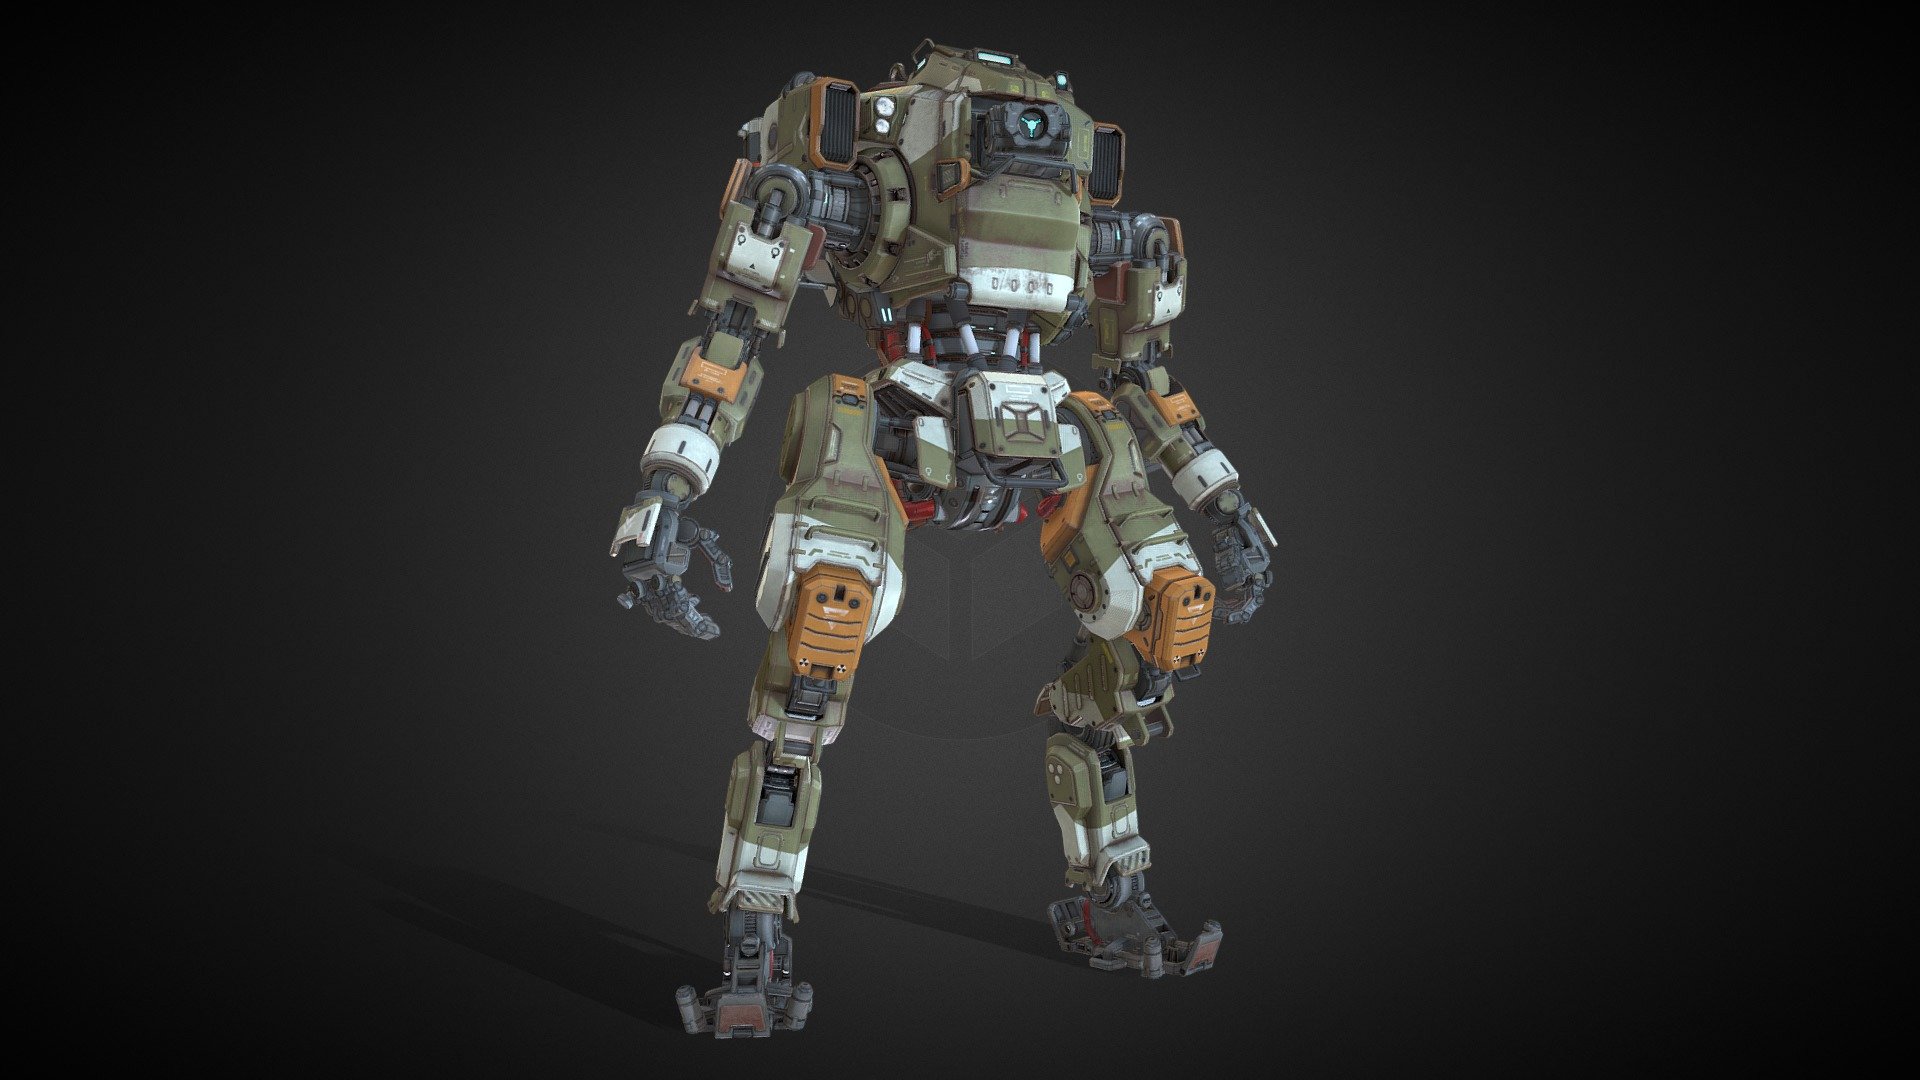 BT-7274 Titanfall

Fan art BT- 7274 Titanfall

*I likes to play Titanfall games and has a passion for BT-7274 is I therefore of creating this 3D work 3d model